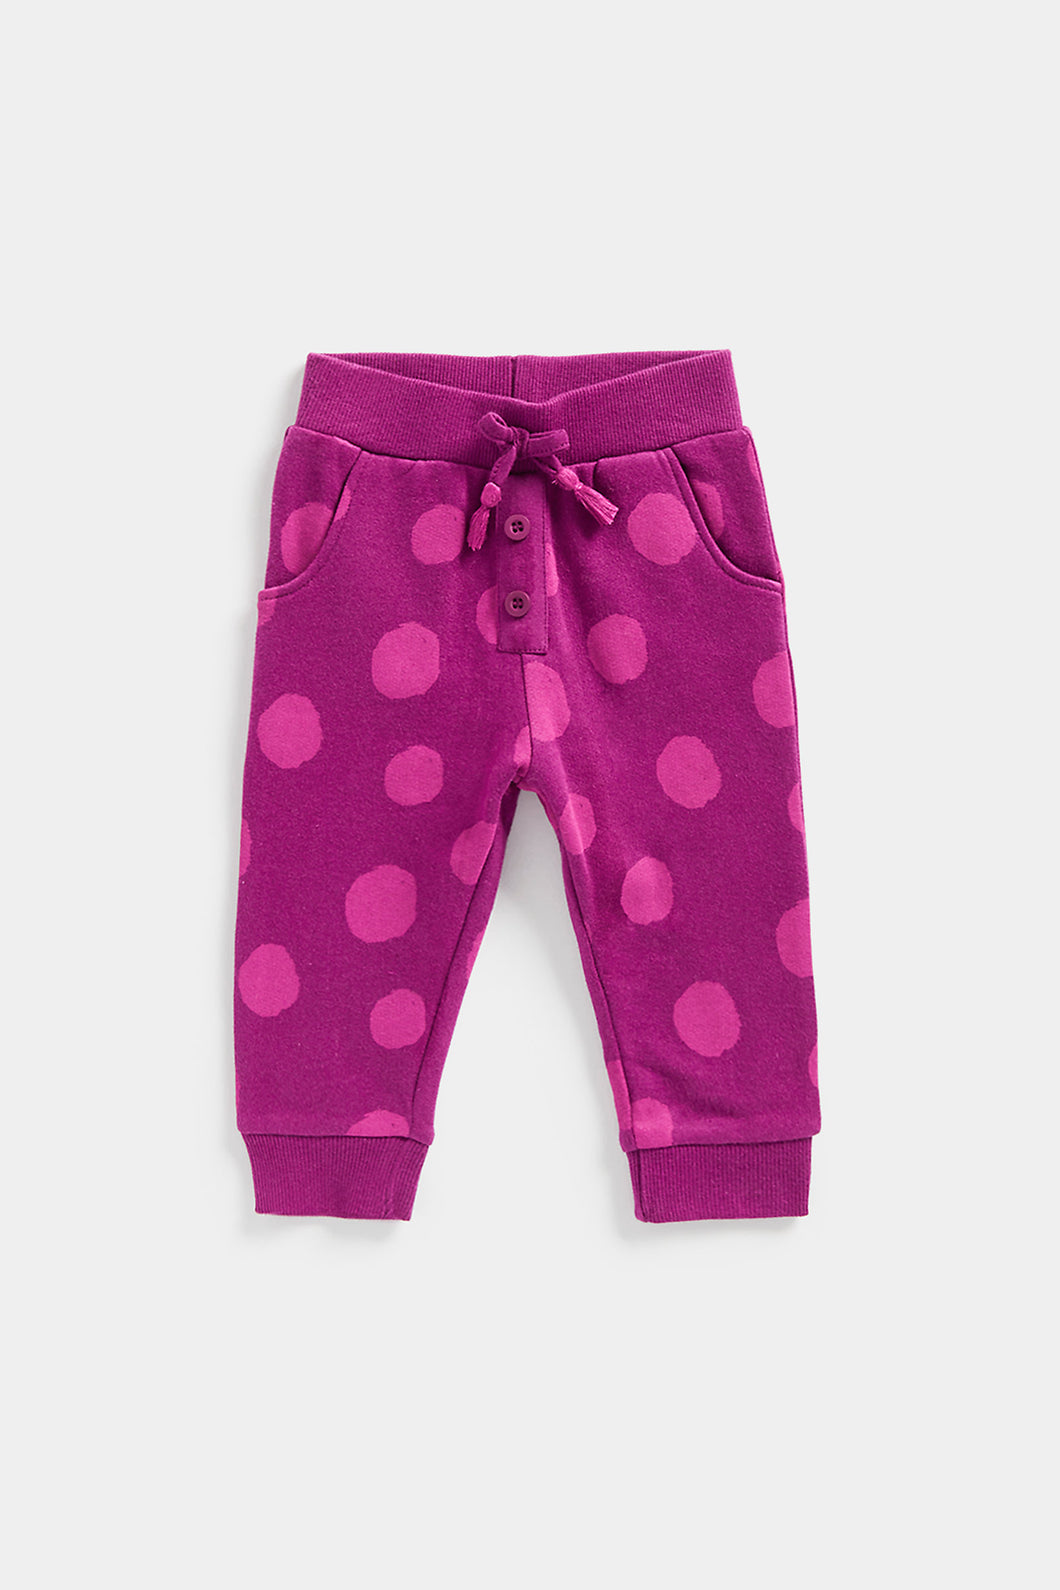 Mothercare Spotty Joggers